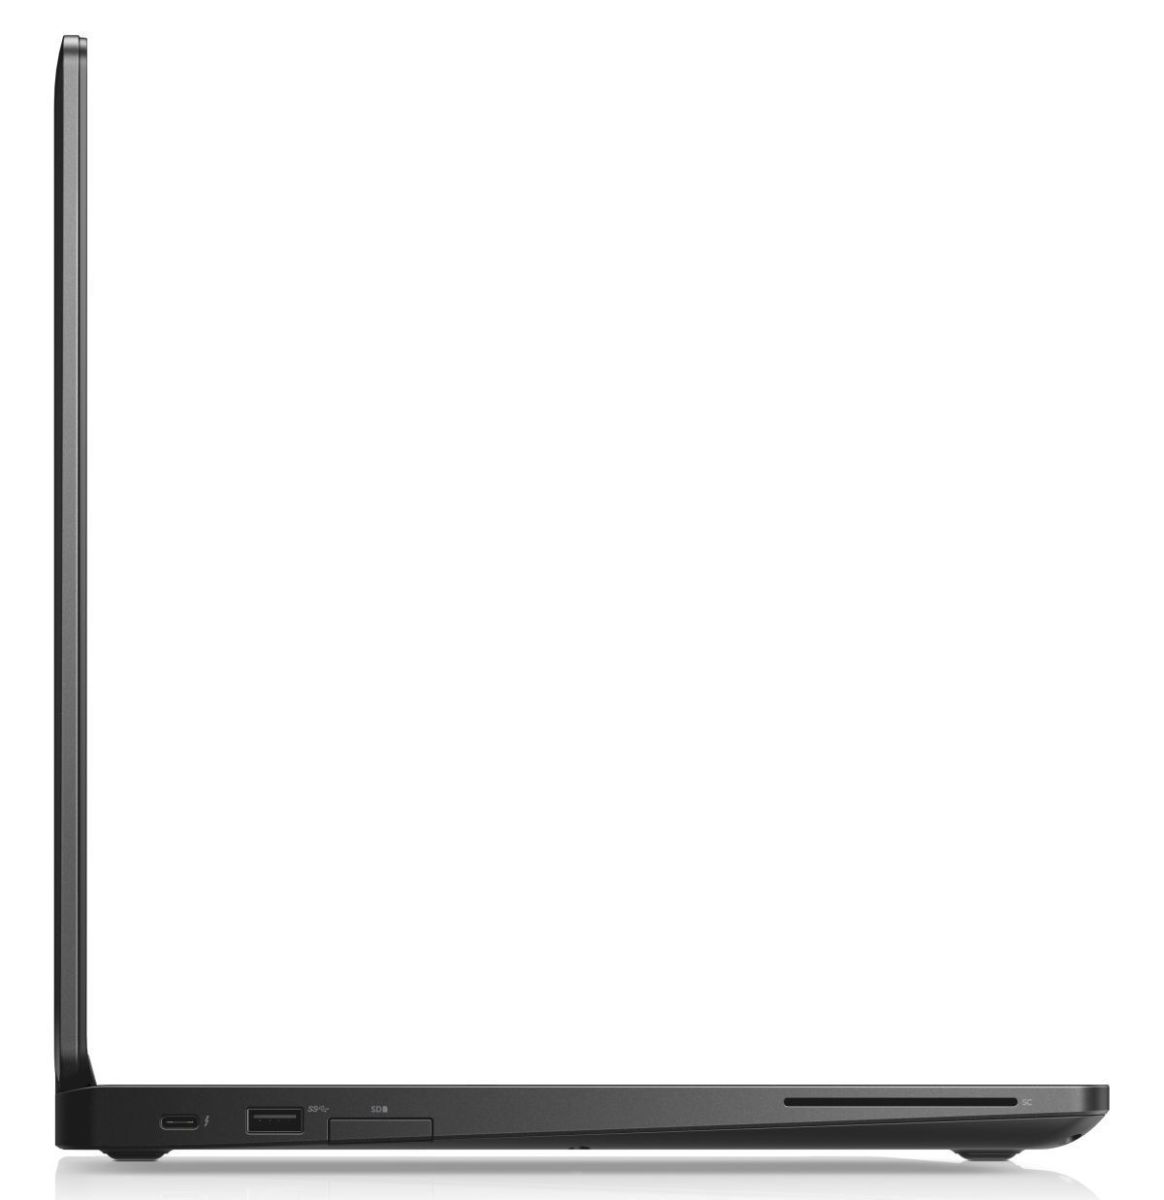 DELL Latitude 5590 - CCYVX laptop specifications